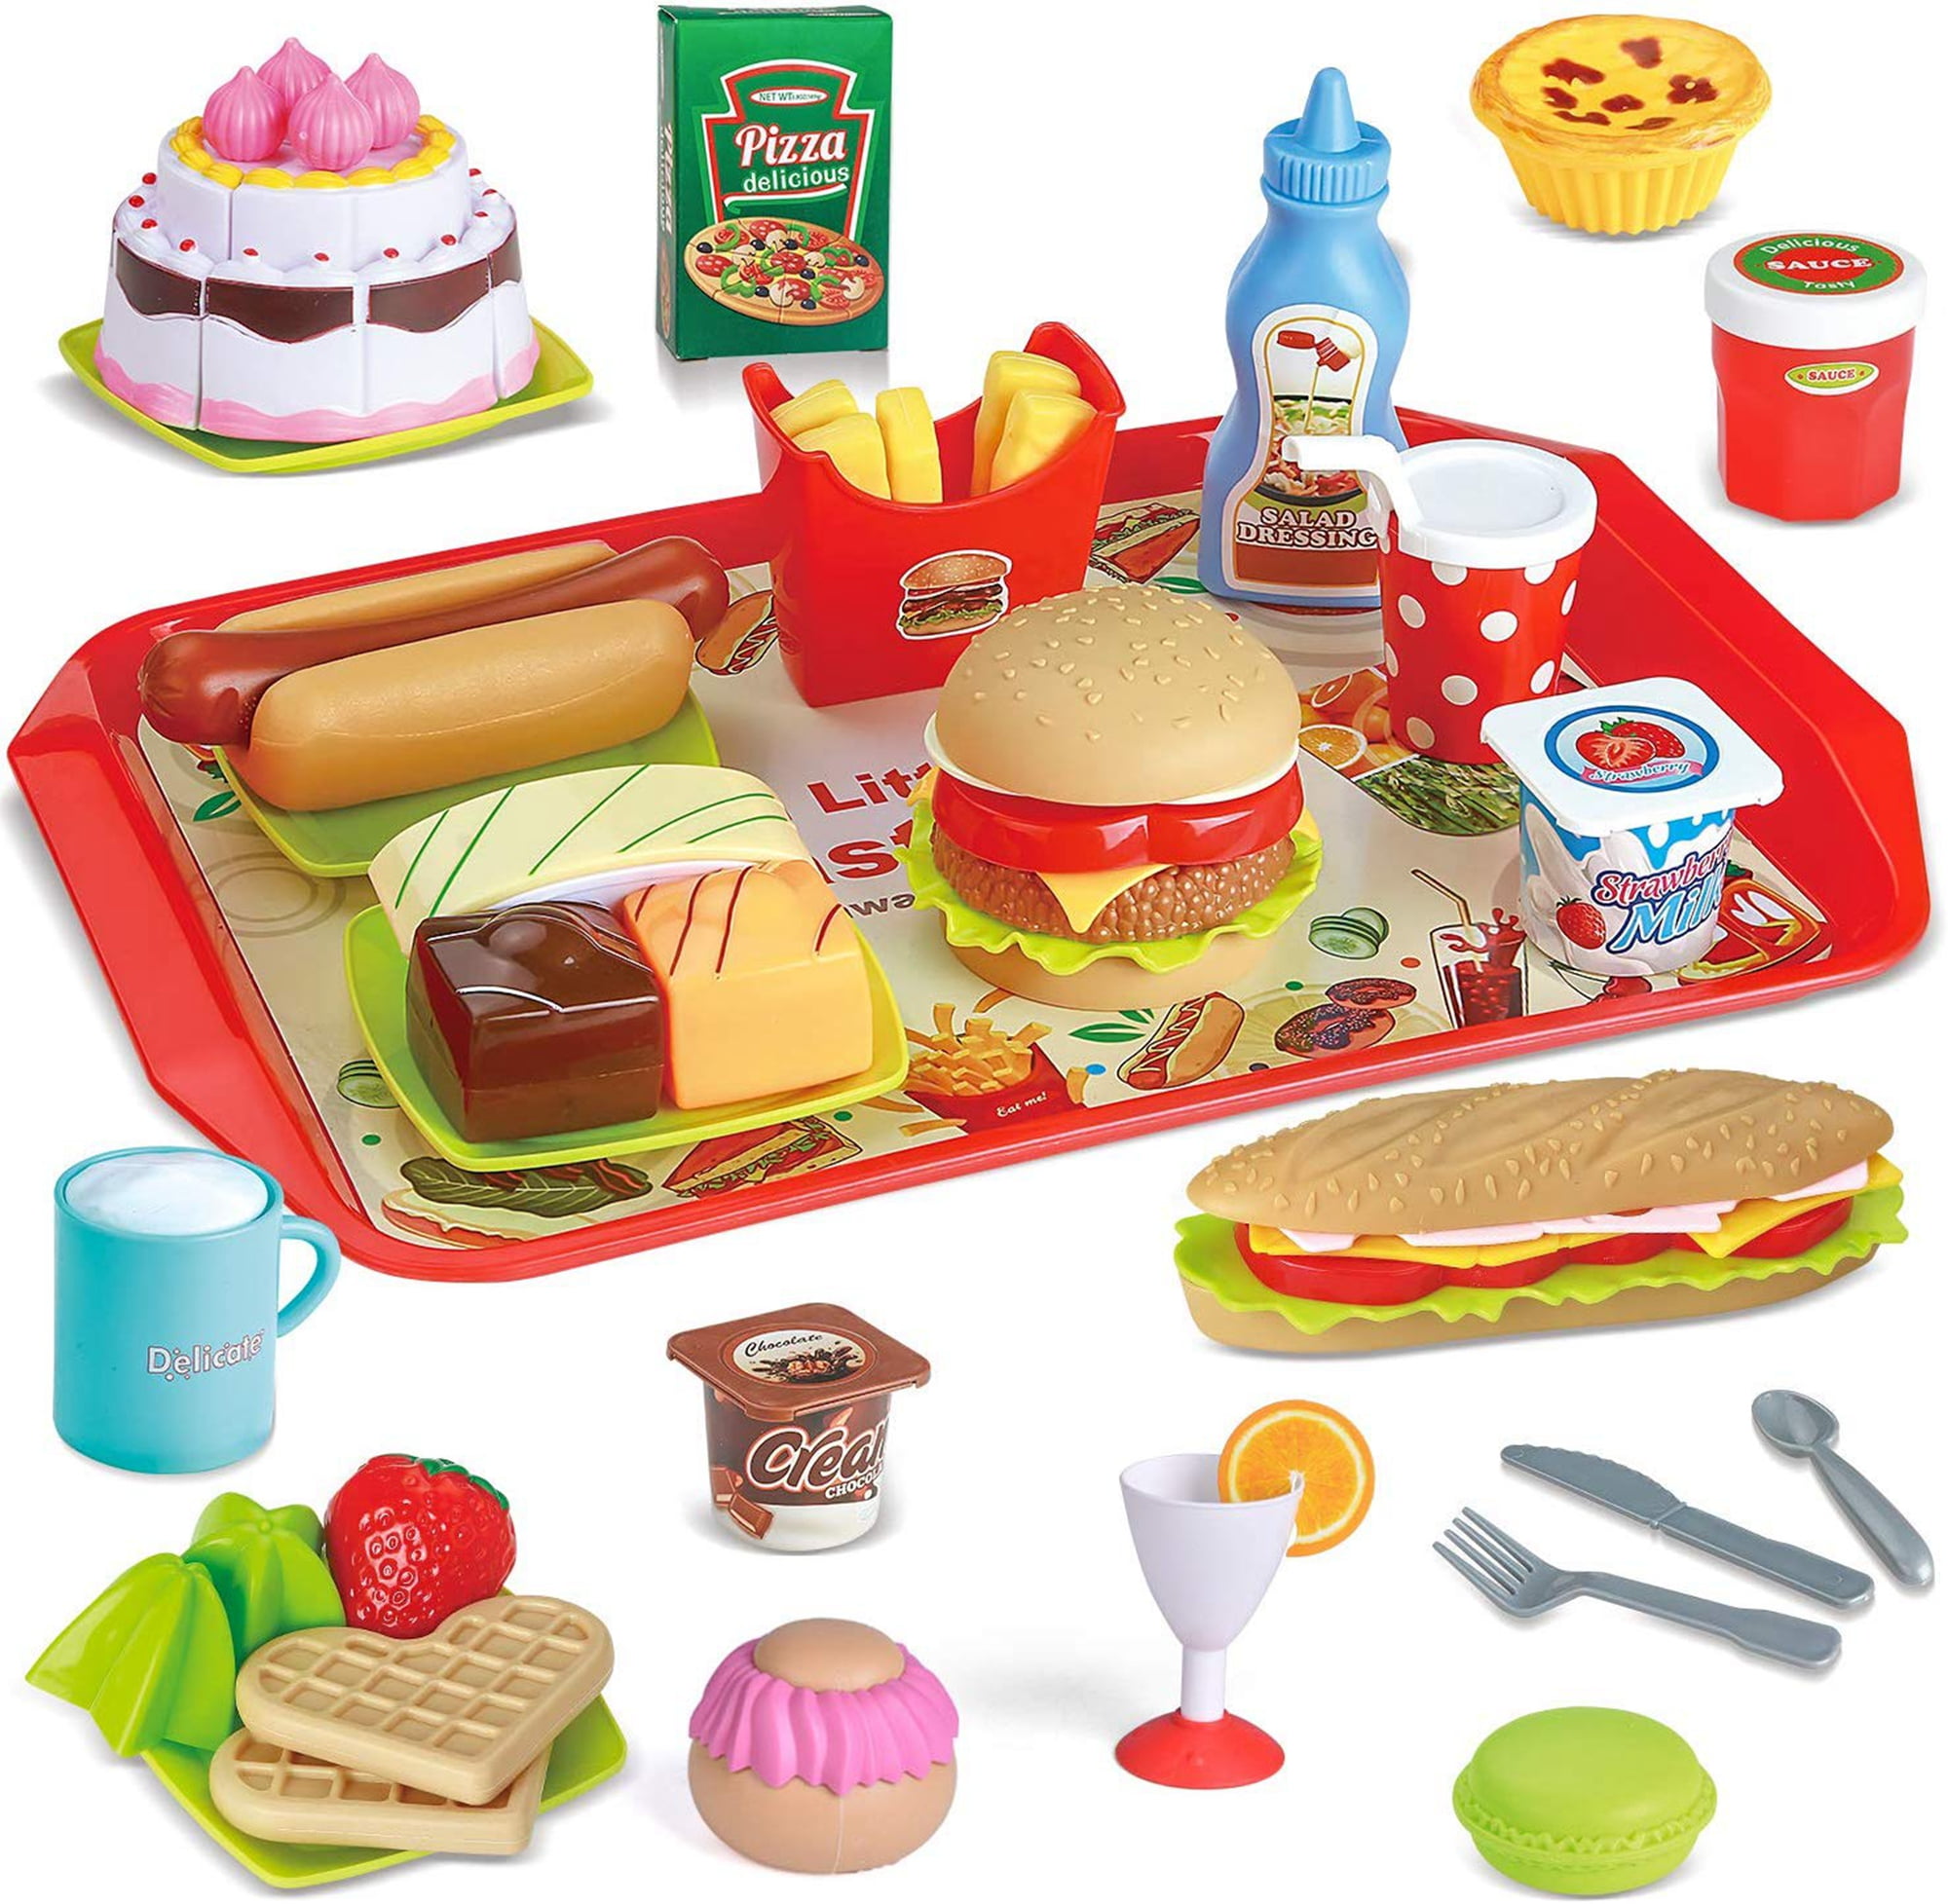 Hamburger & Hot Dog Fast Food Kitchen Cooking Play Set for Kids Toddlers 